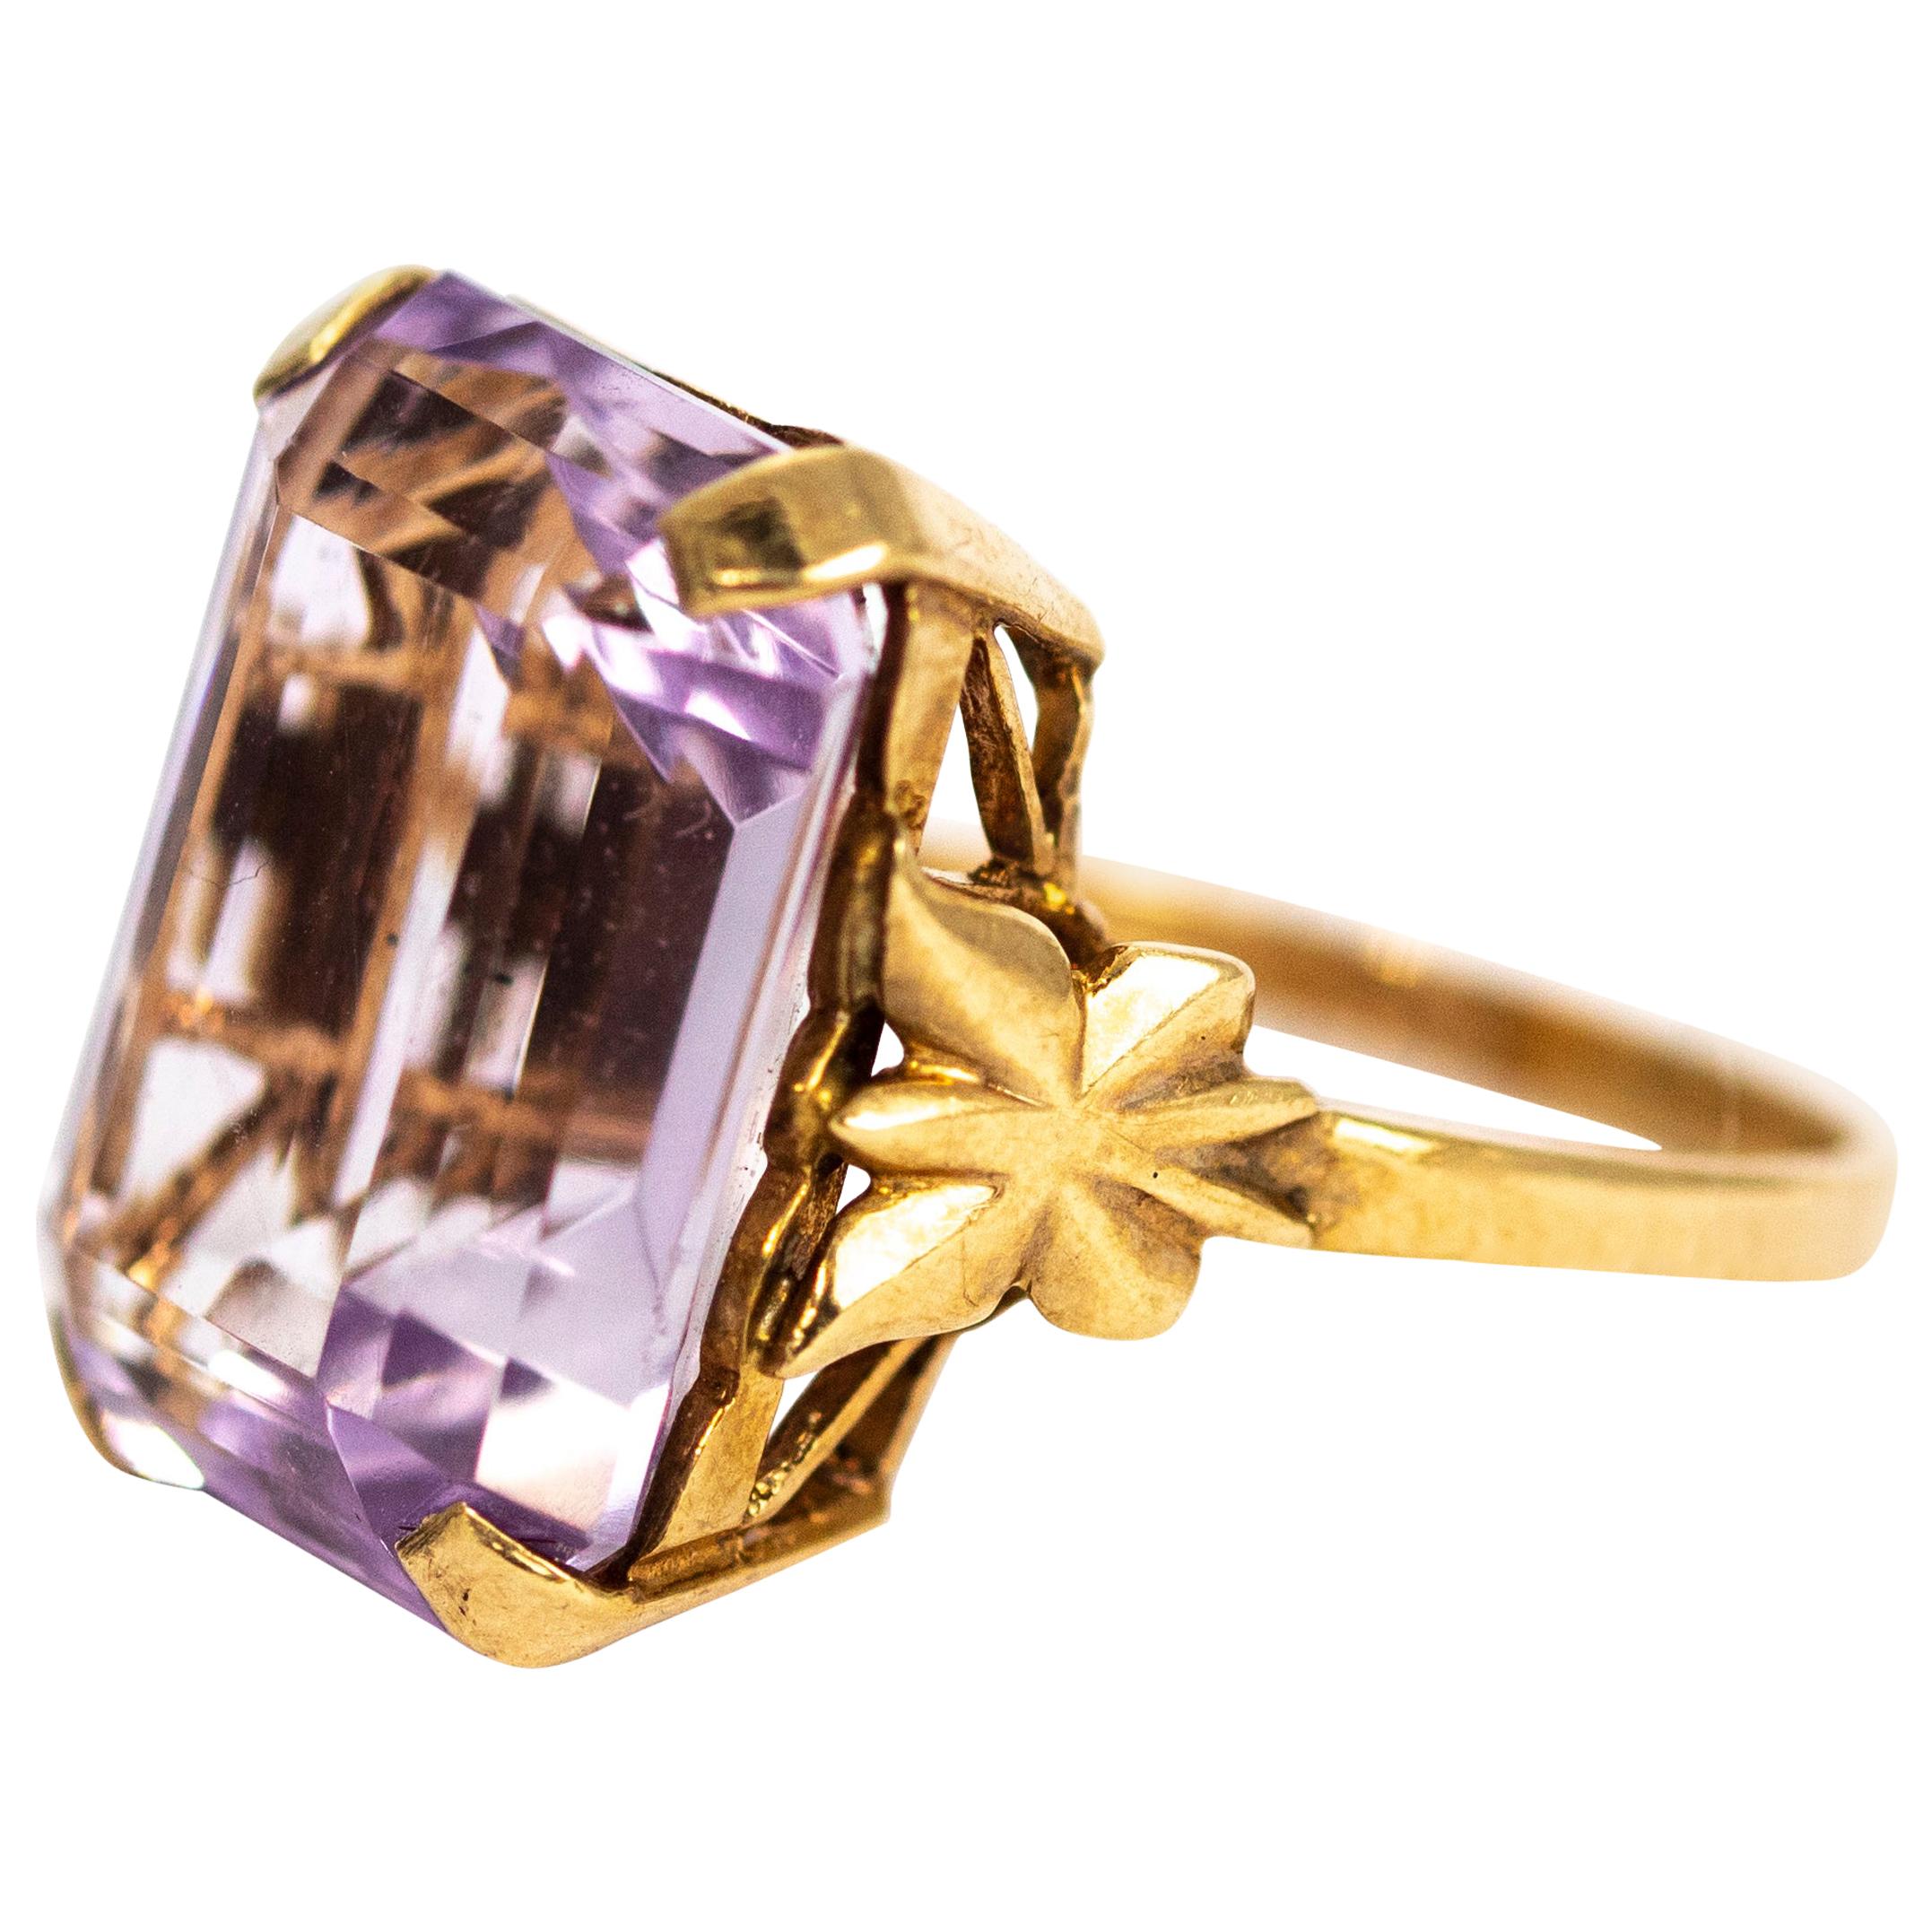 Vintage Art Deco Style 9 Carat Gold Amethyst Cocktail Ring